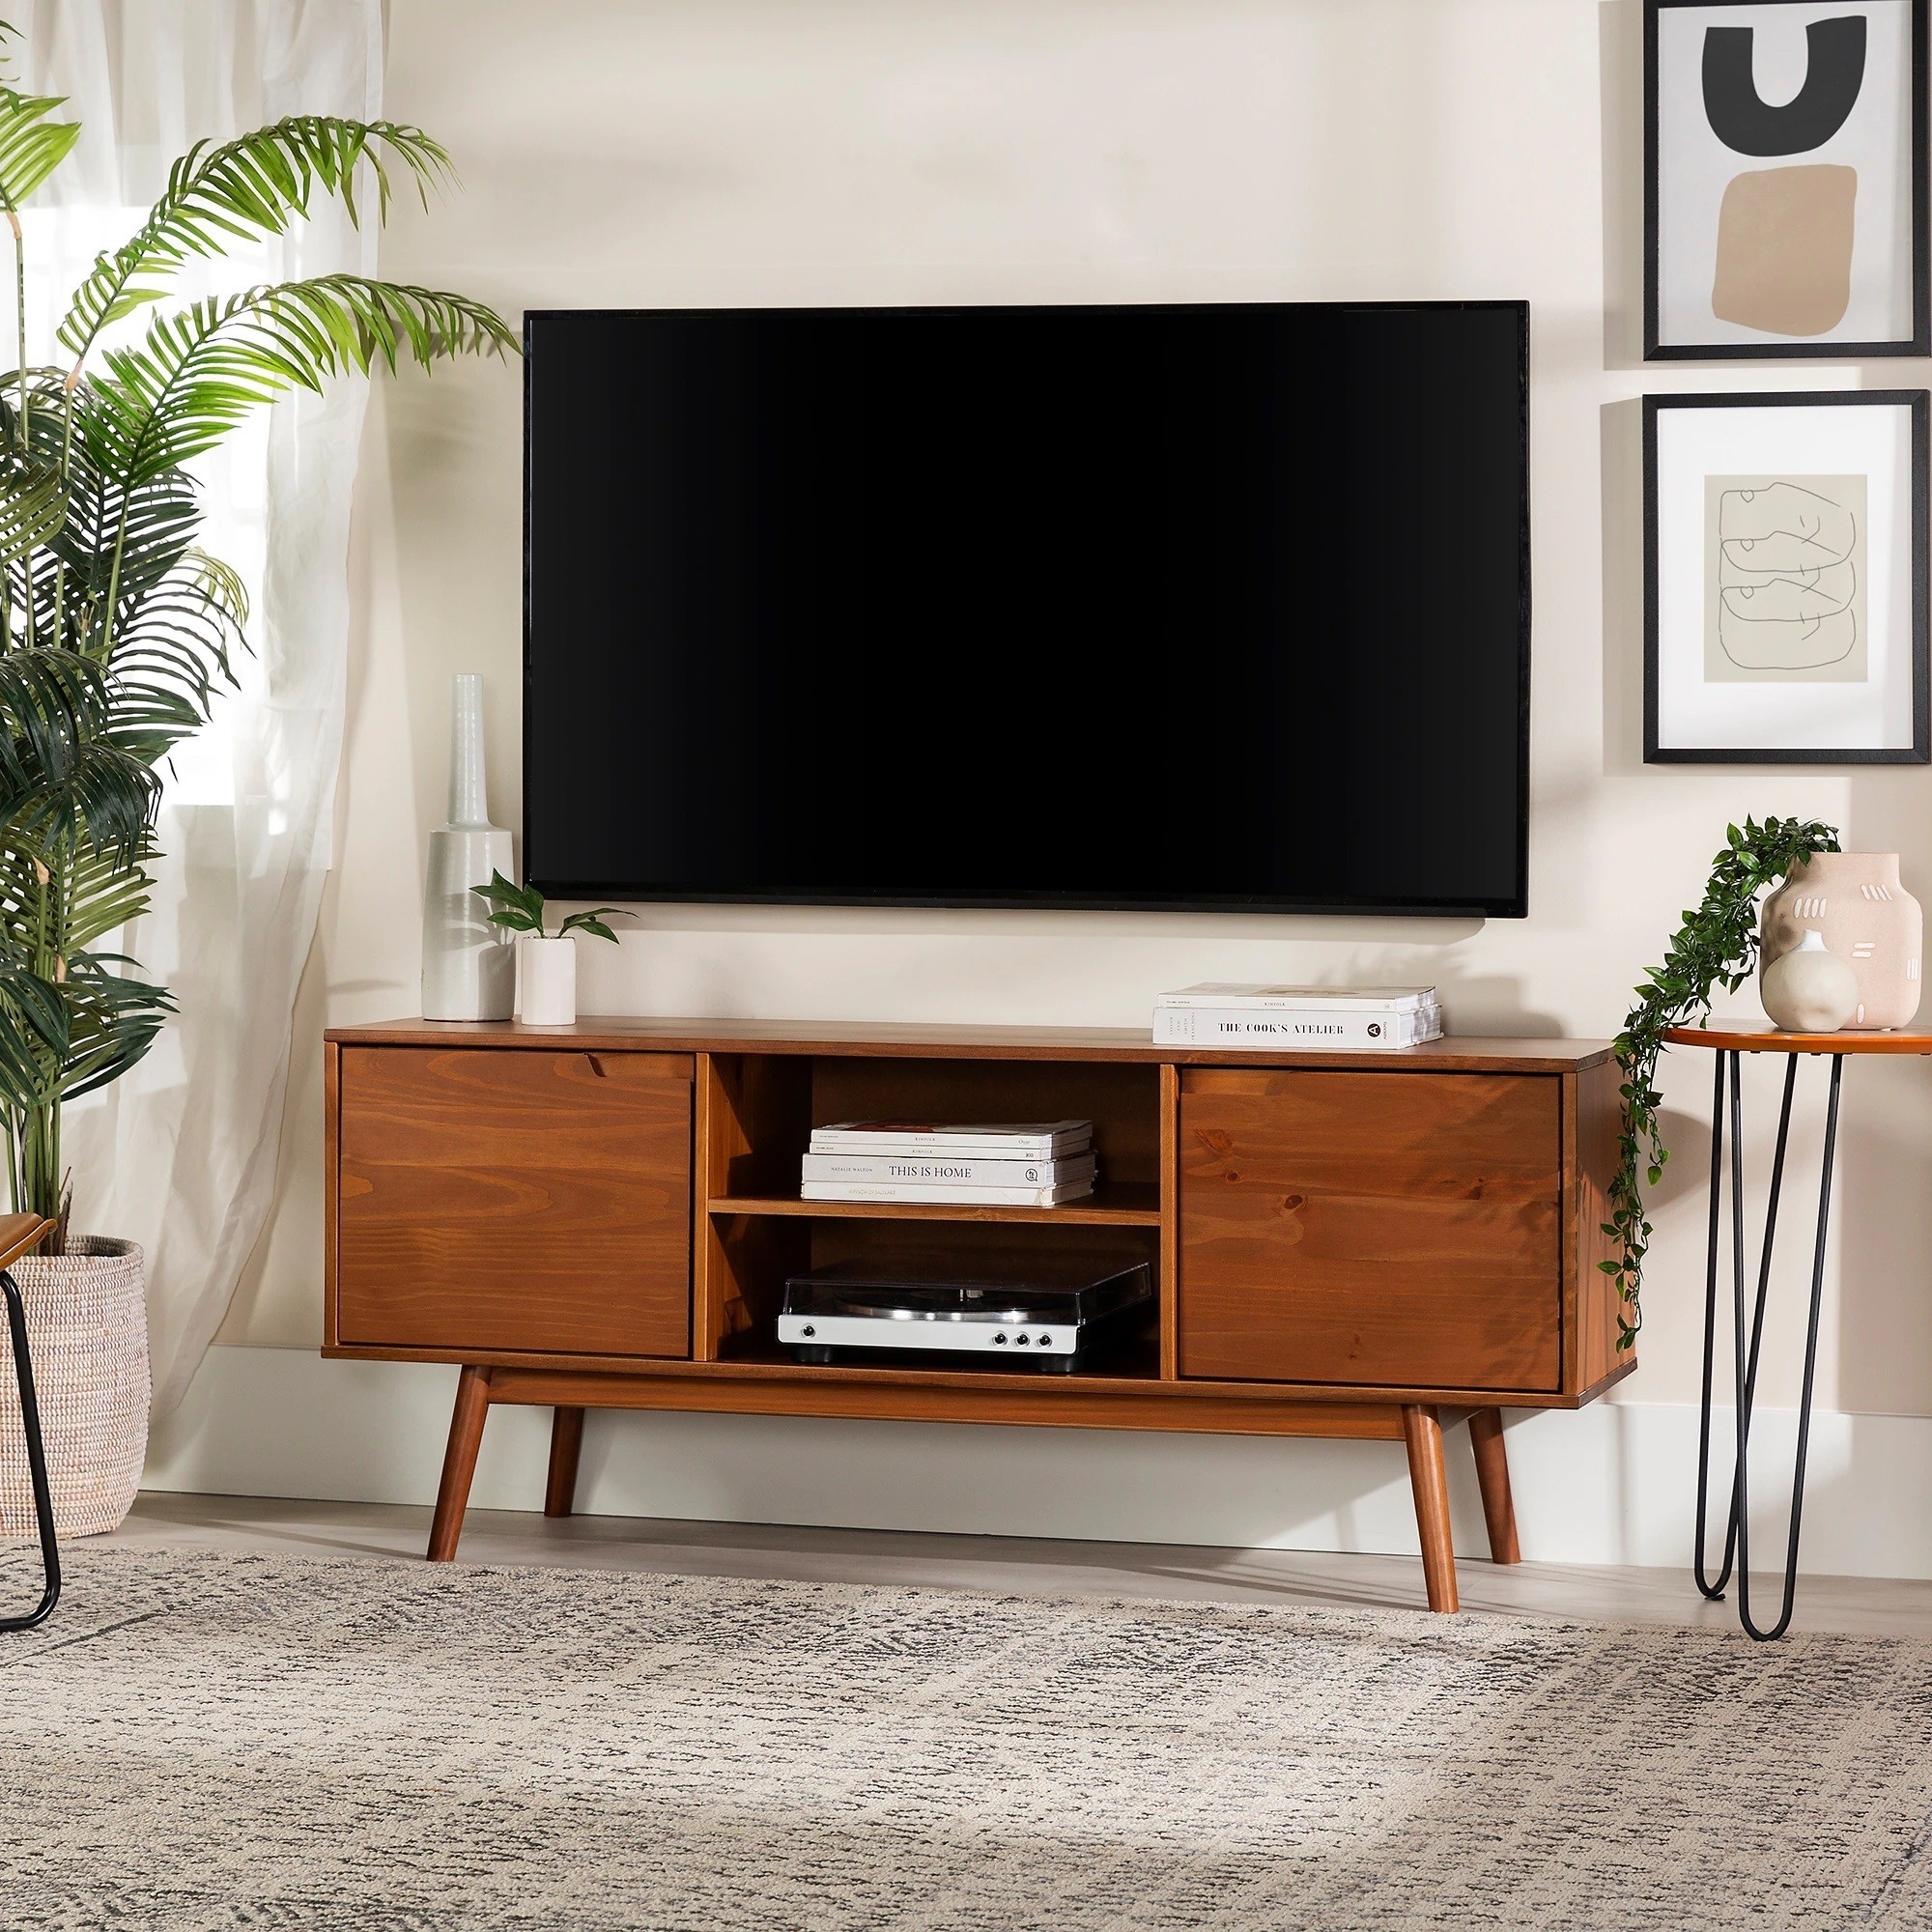 Mount a TV Over a Wood Audio Cabinet for an Entertainment Hub